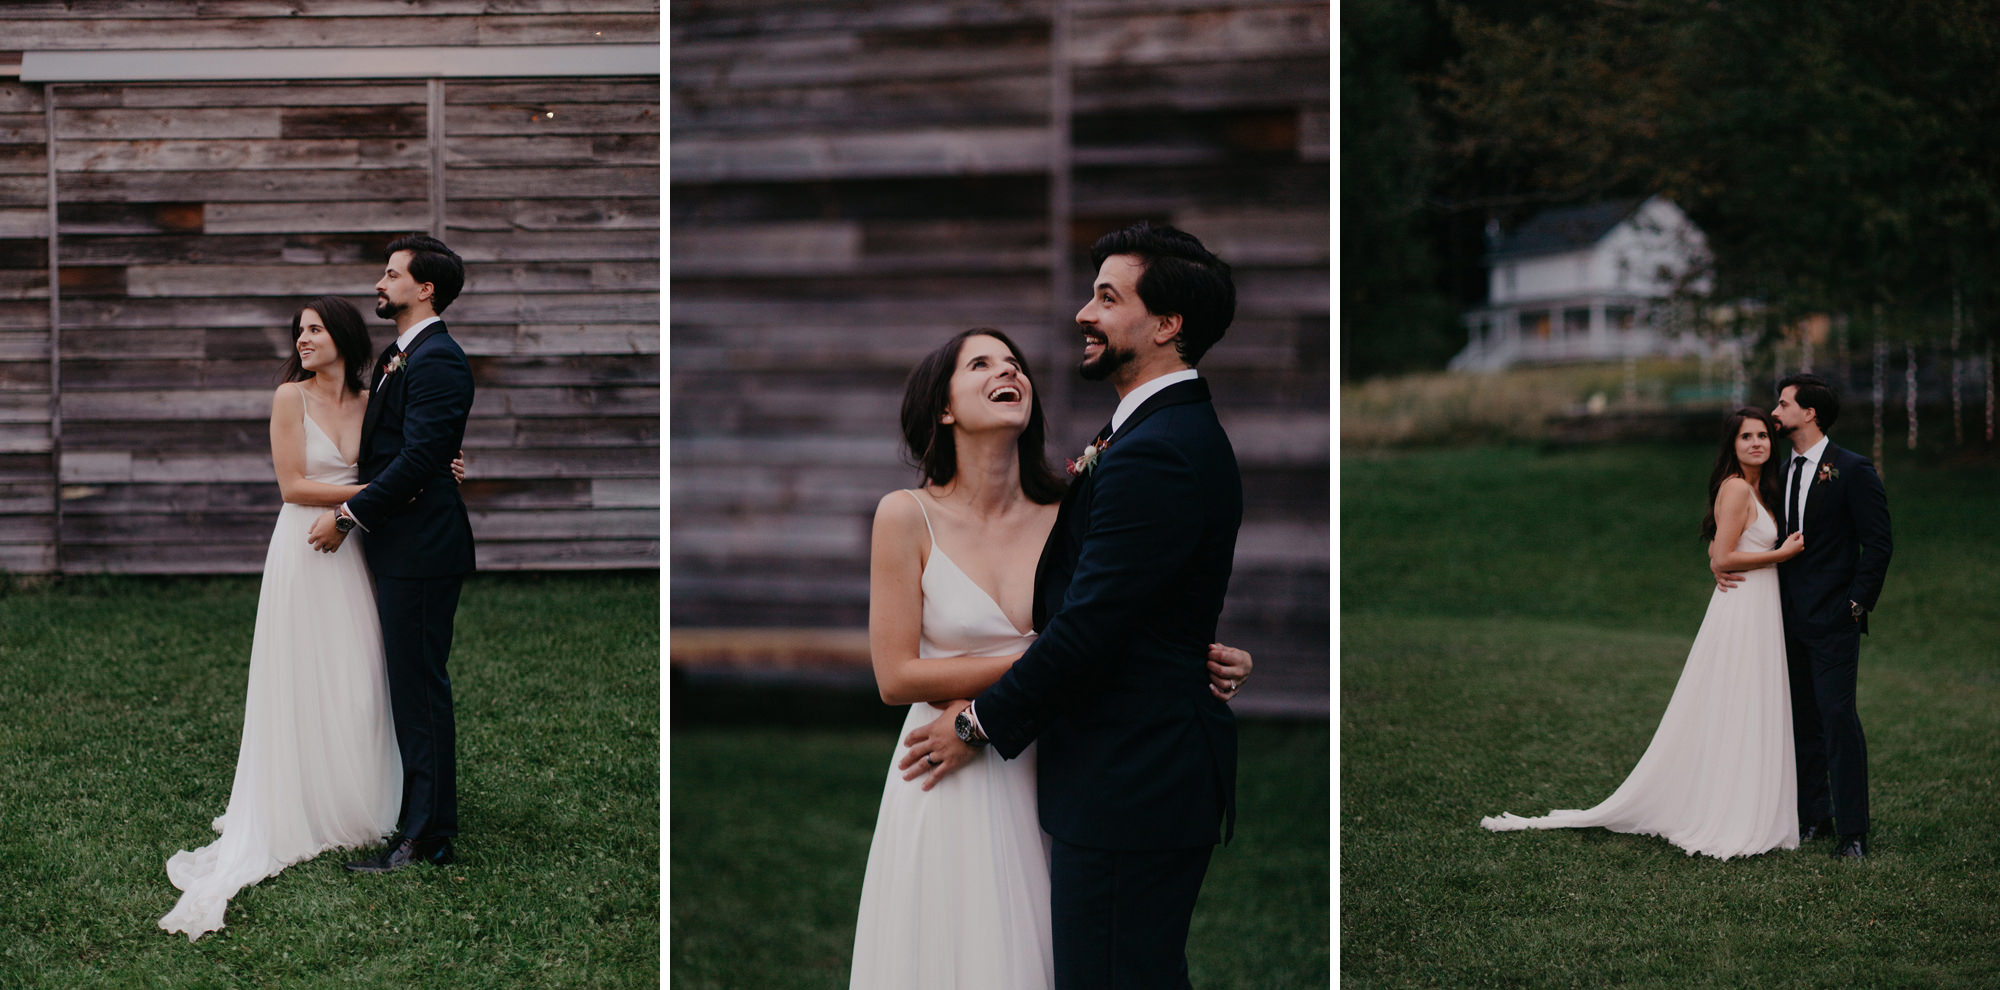 Kate+Andrew-092